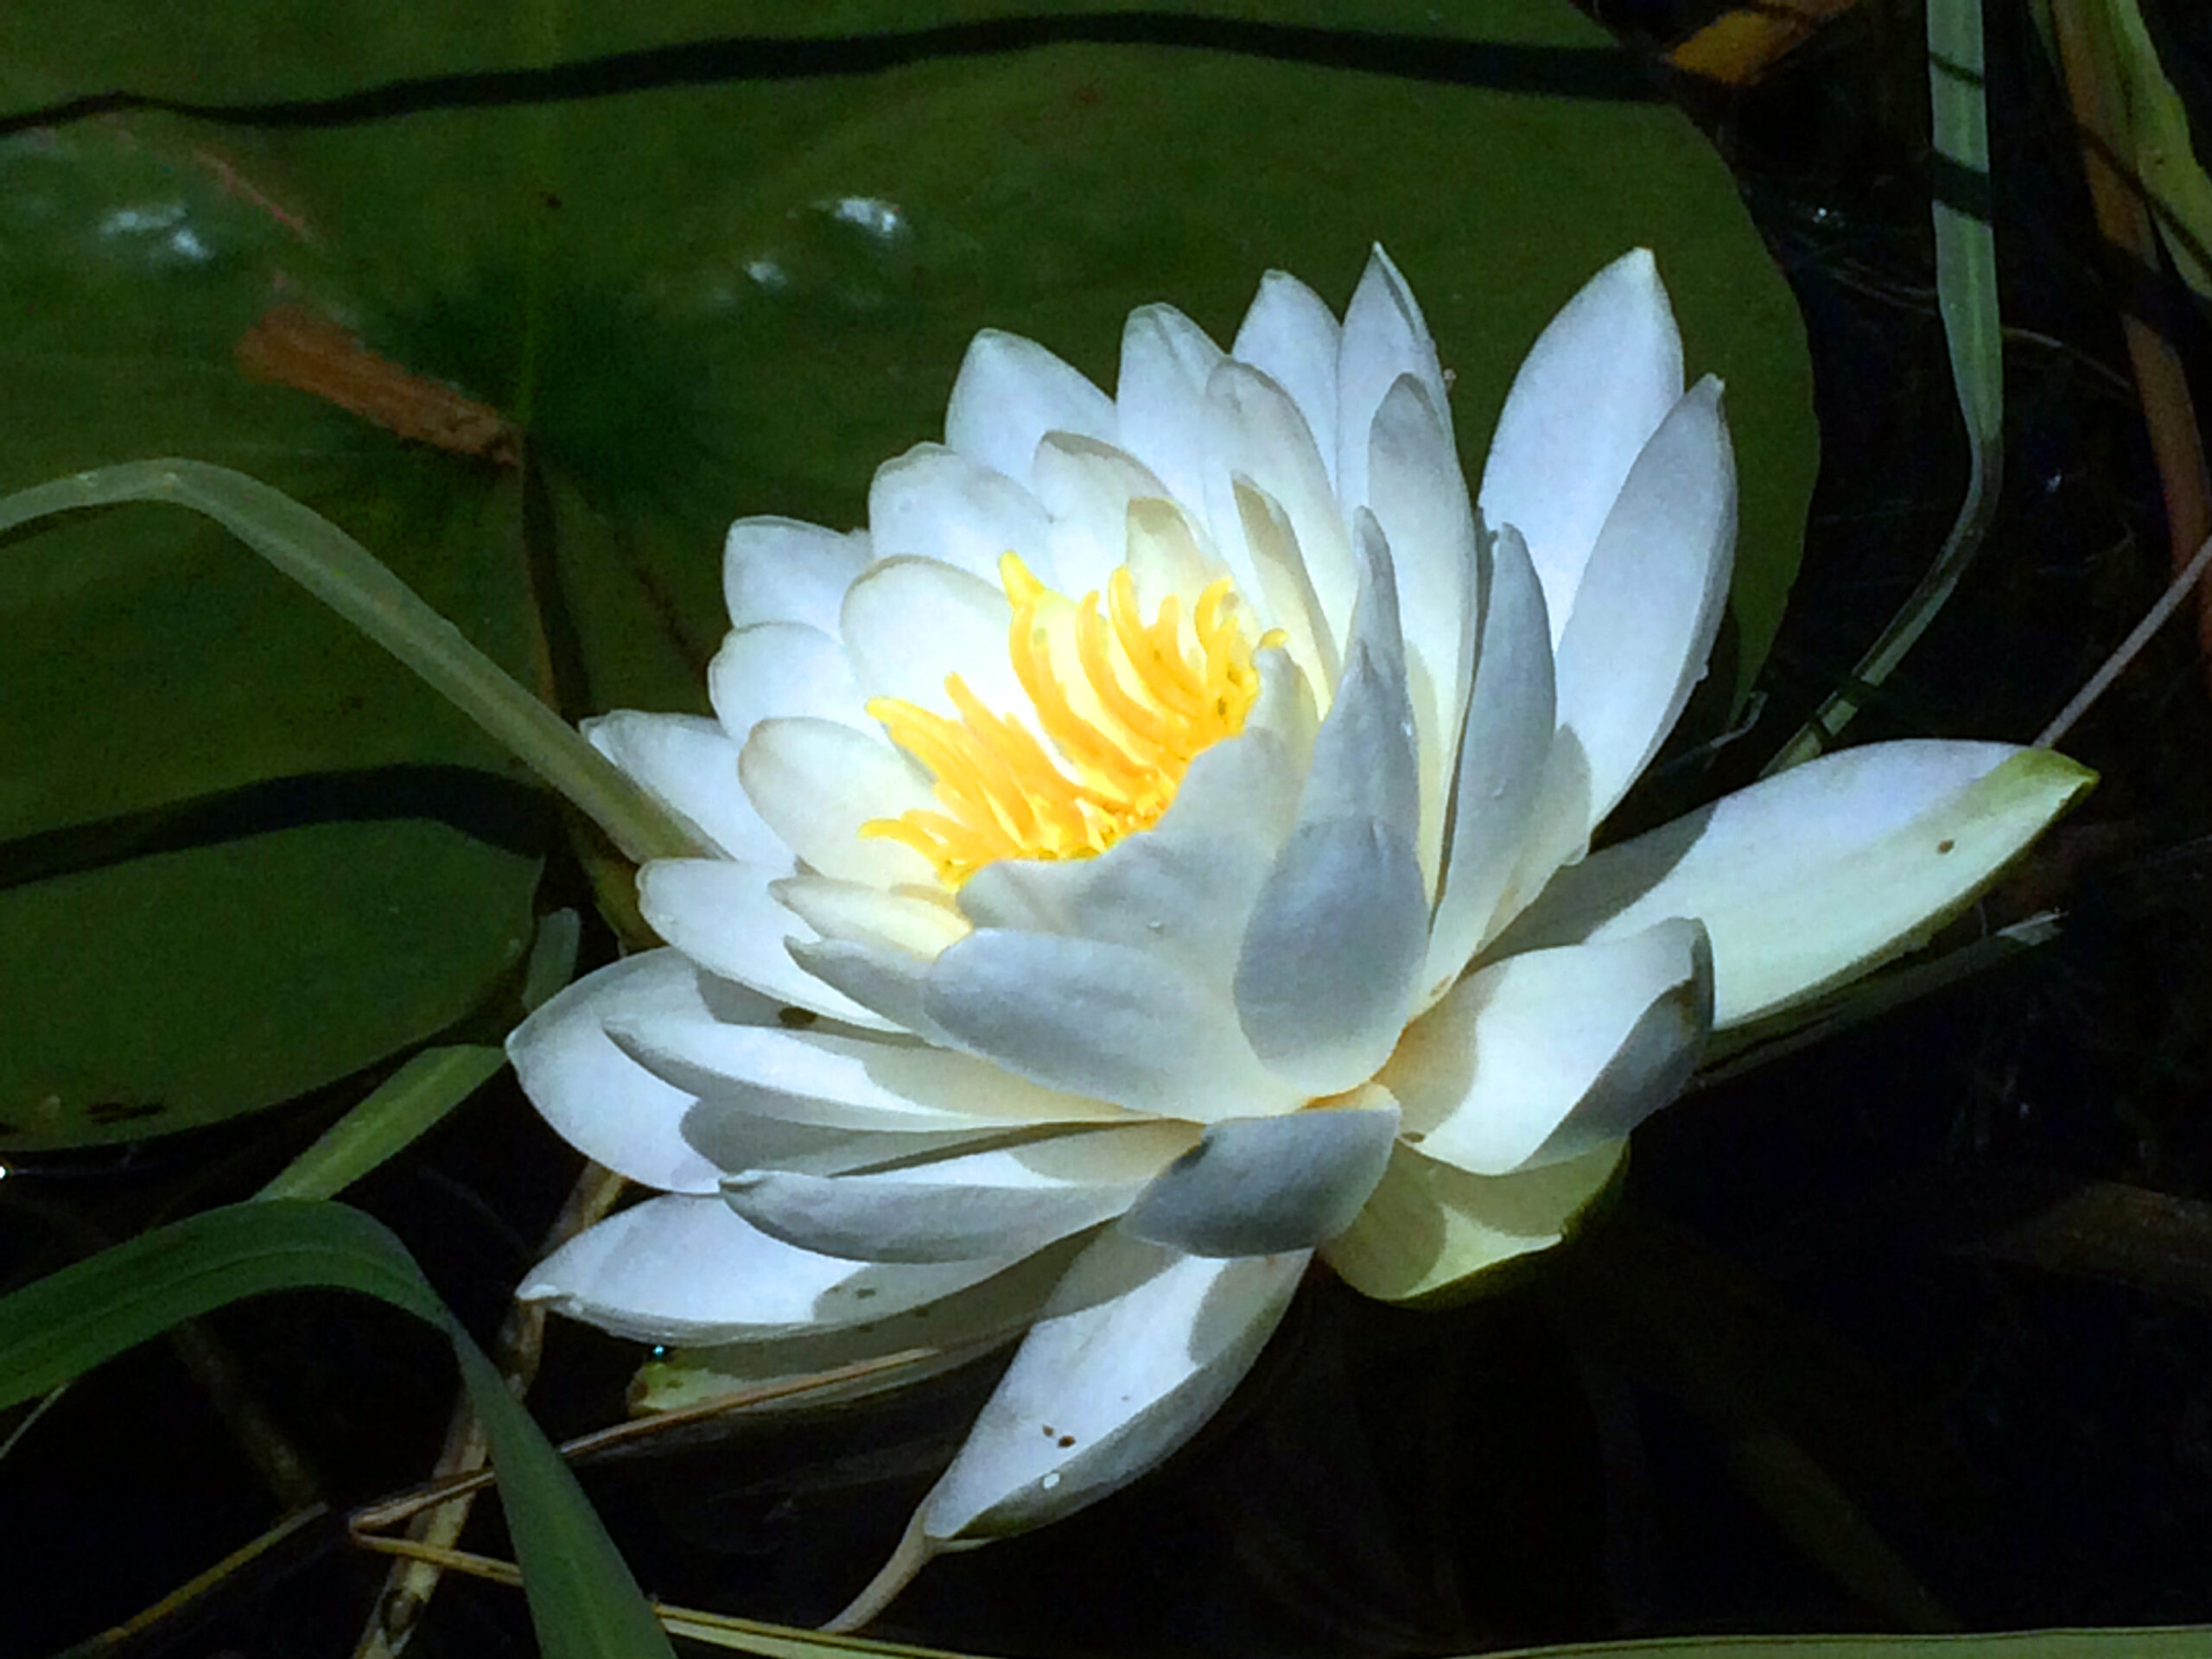 Water Lily July 7, 2017